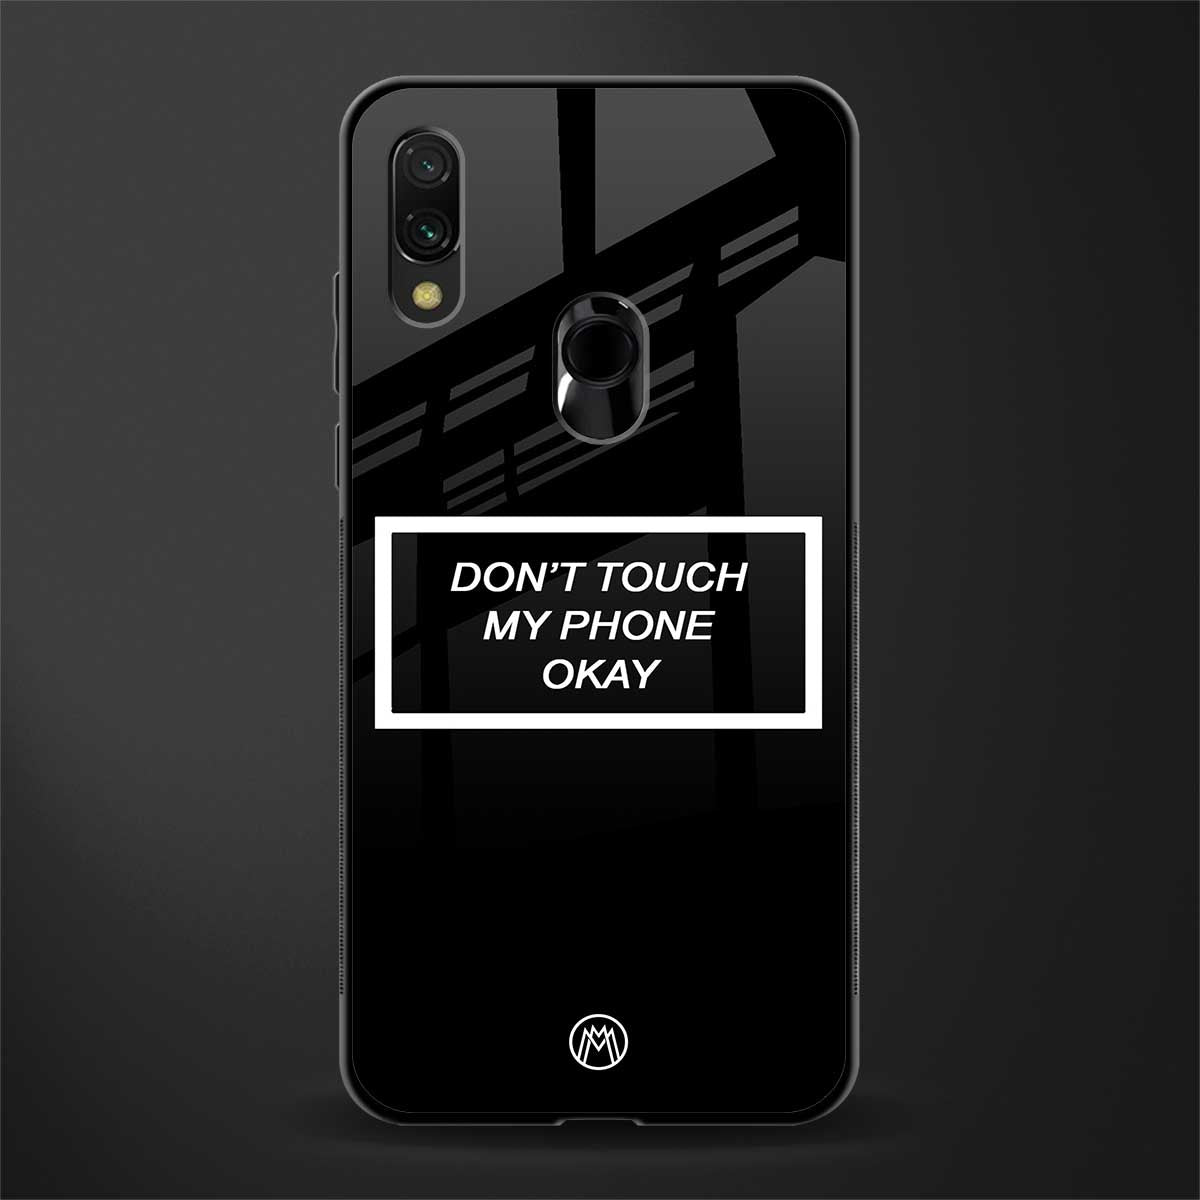 don't touch my phone black glass case for redmi note 7 pro image